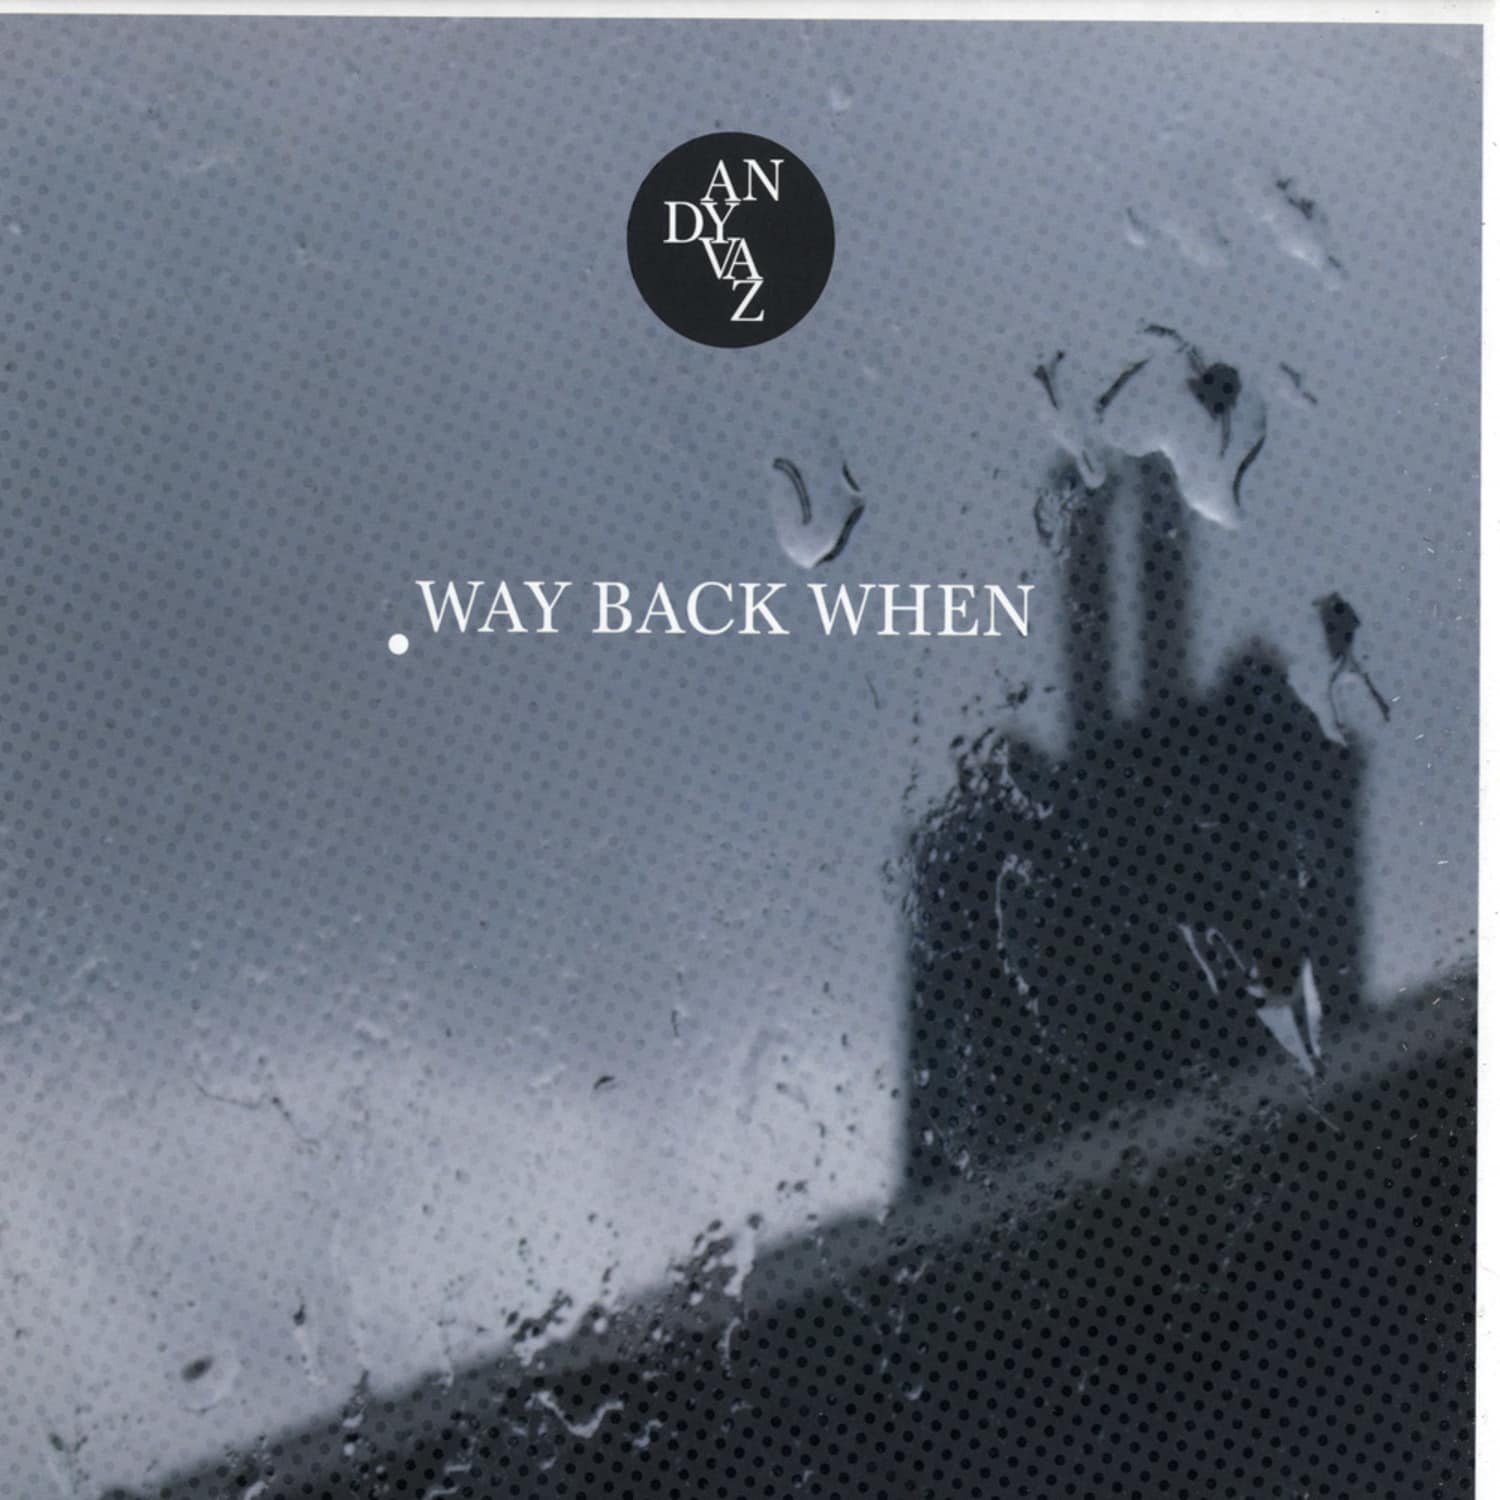 Andy Vaz - WAY BACK WHEN